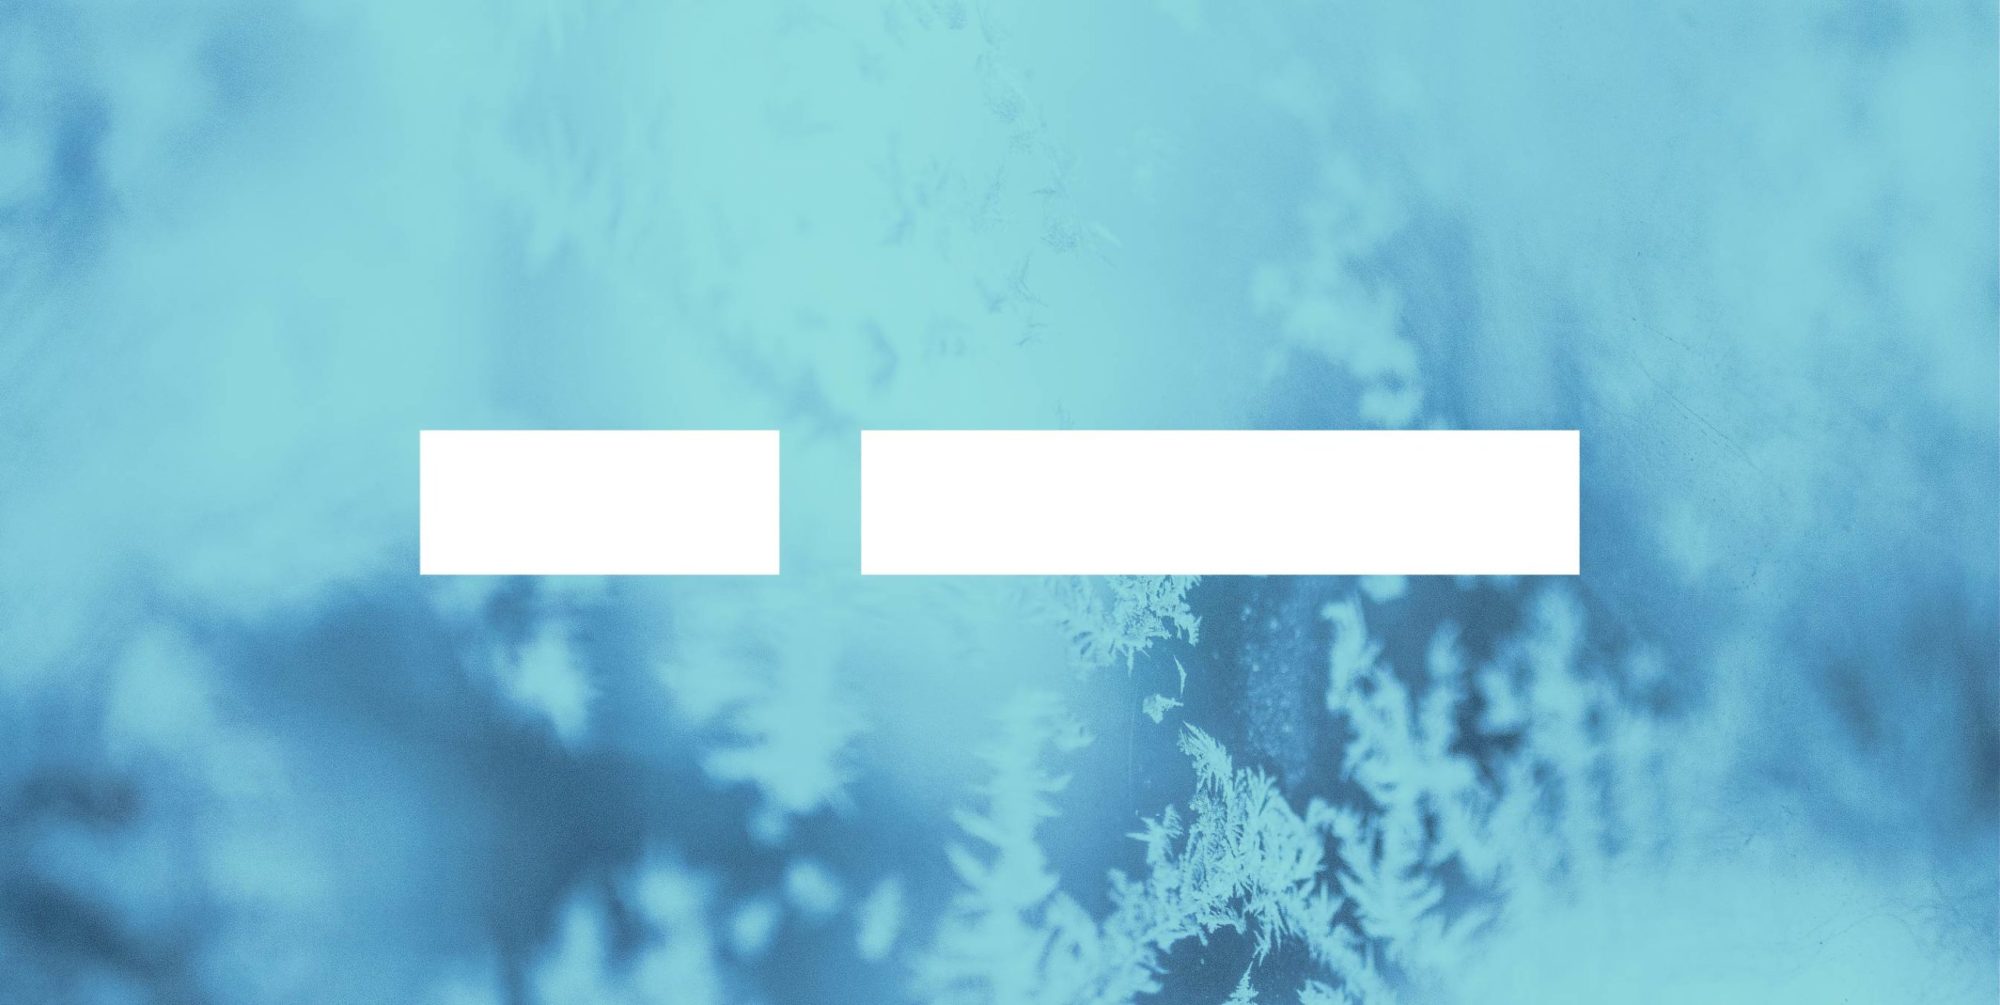 An image of snowflakes with blue overlay and dash symbols.